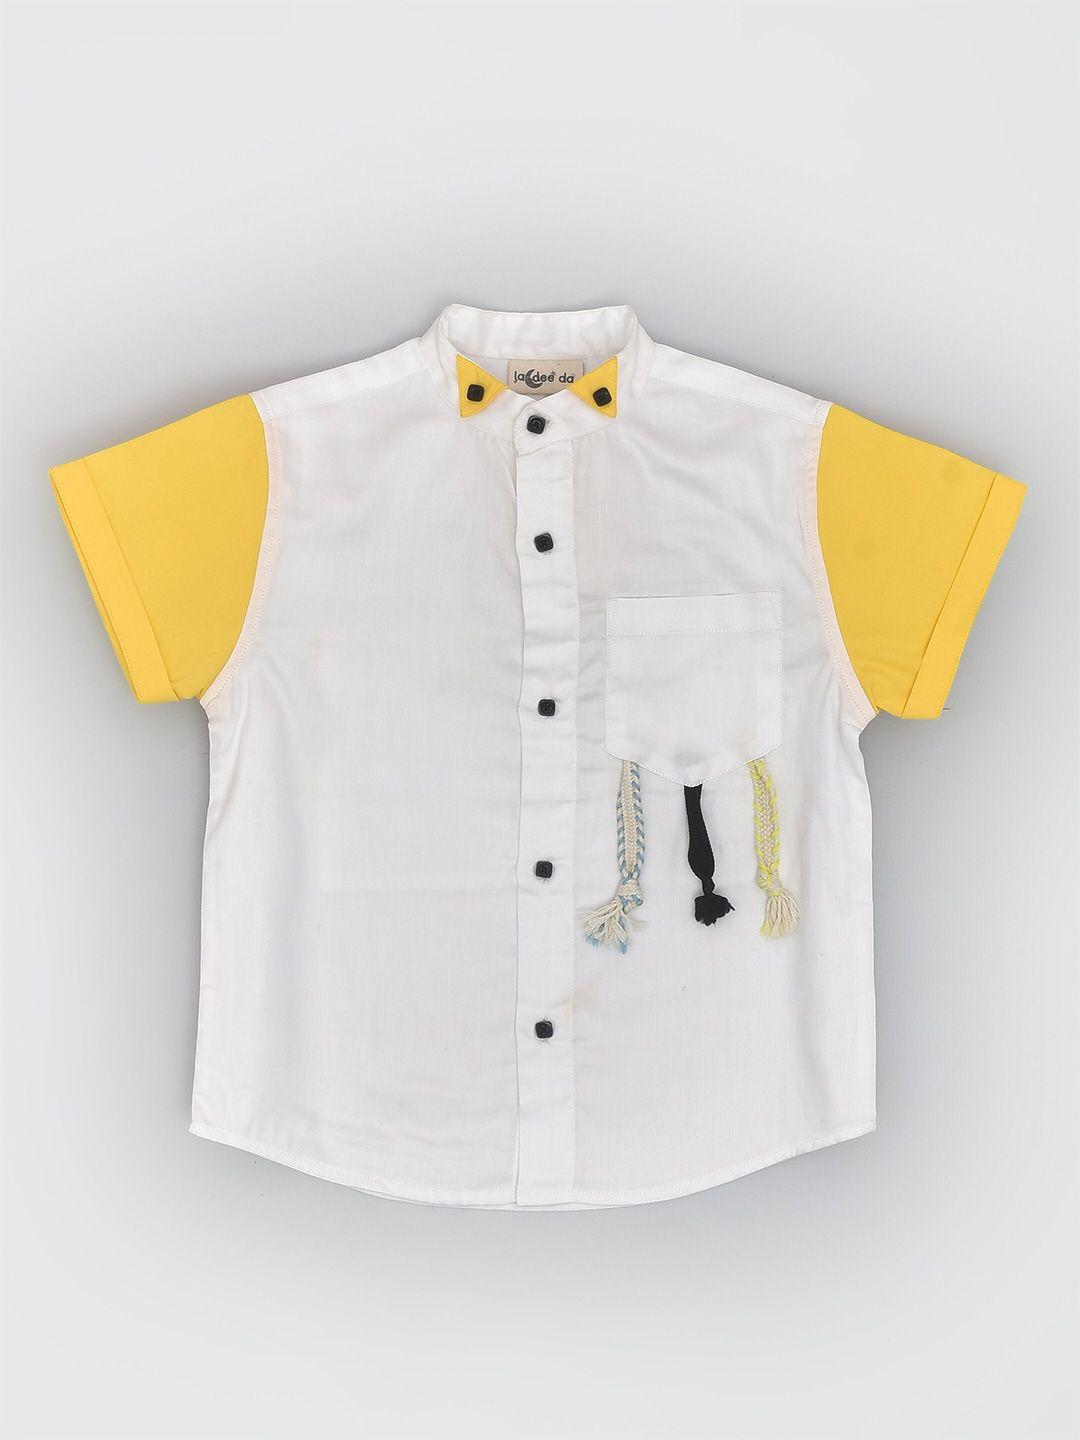 baesd boys graphic printed pure cotton casual shirt